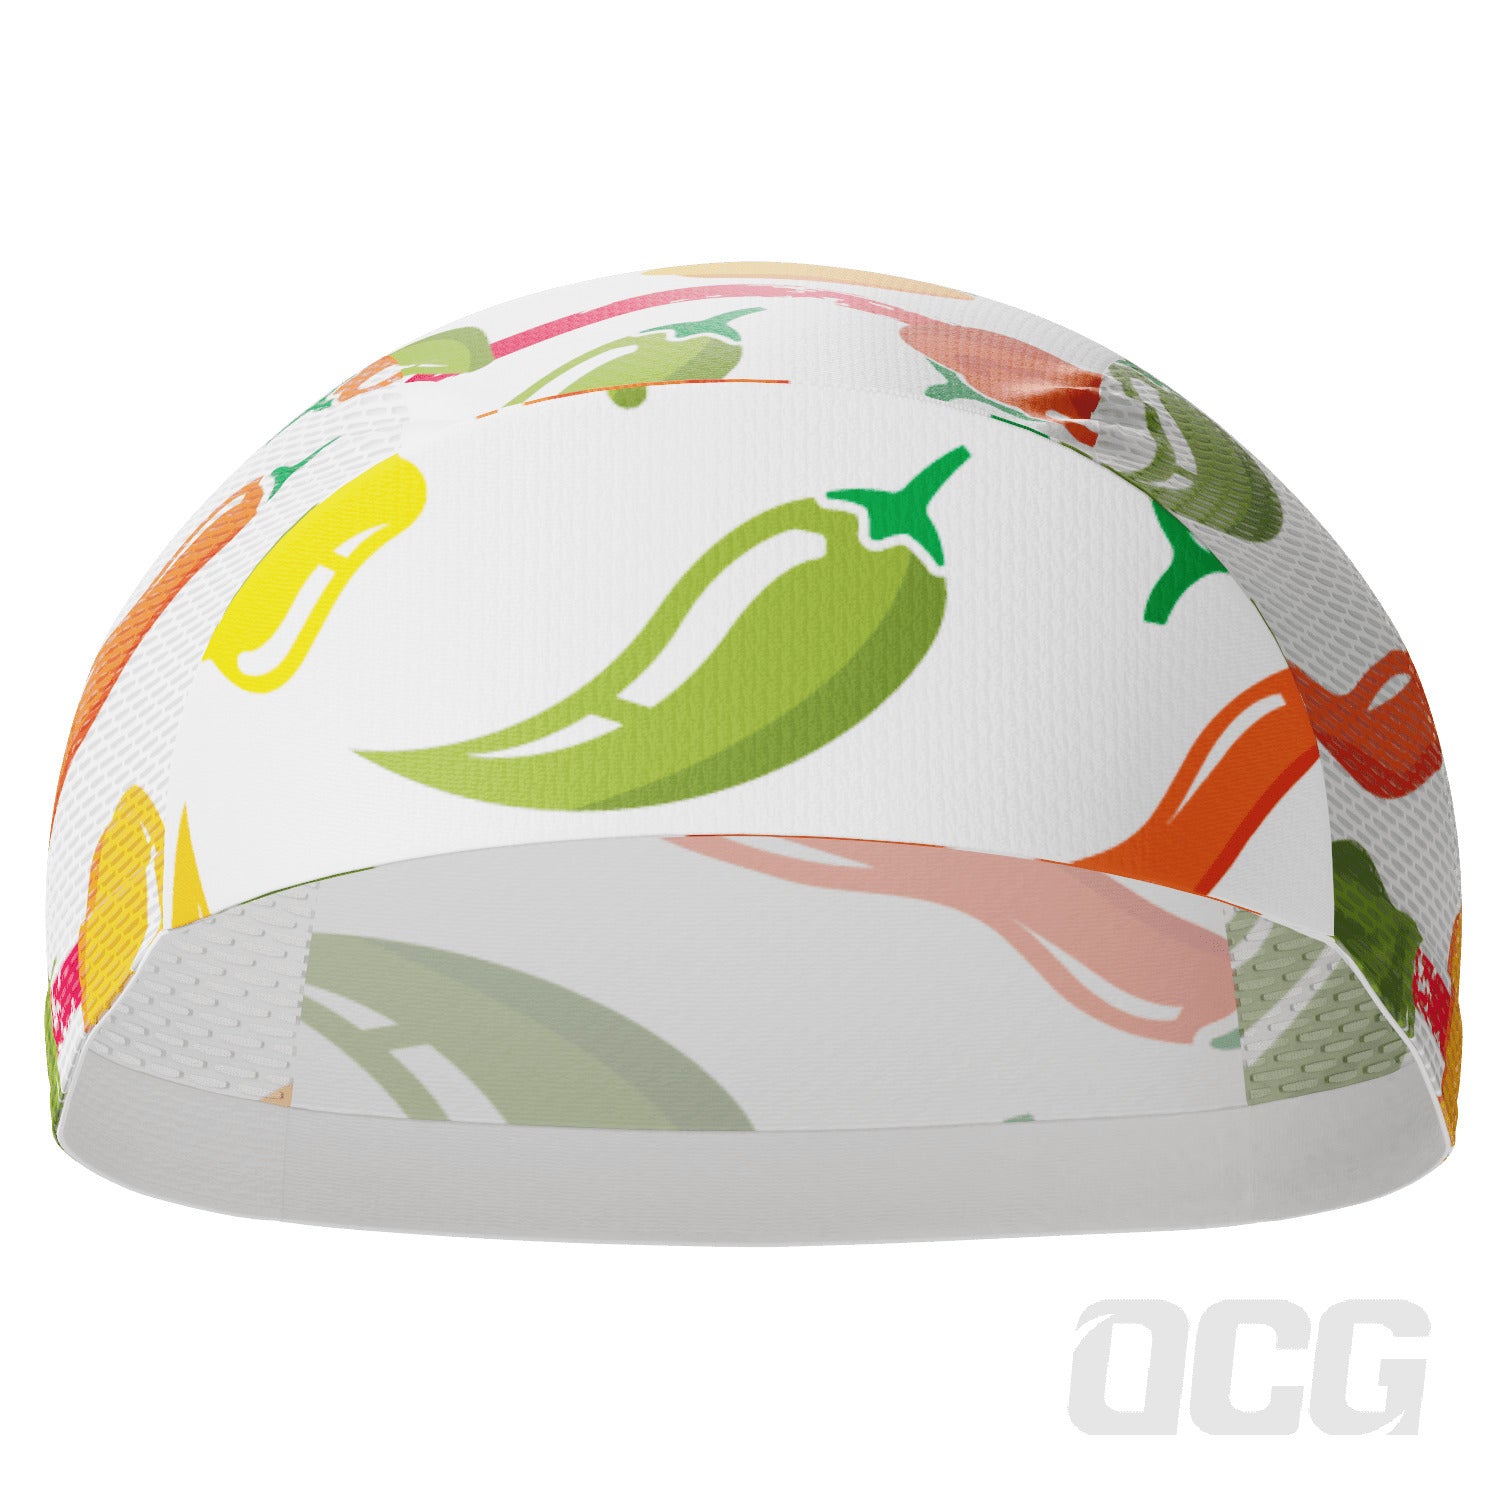 Unisex Sprinkles Quick Dry Cycling Cap